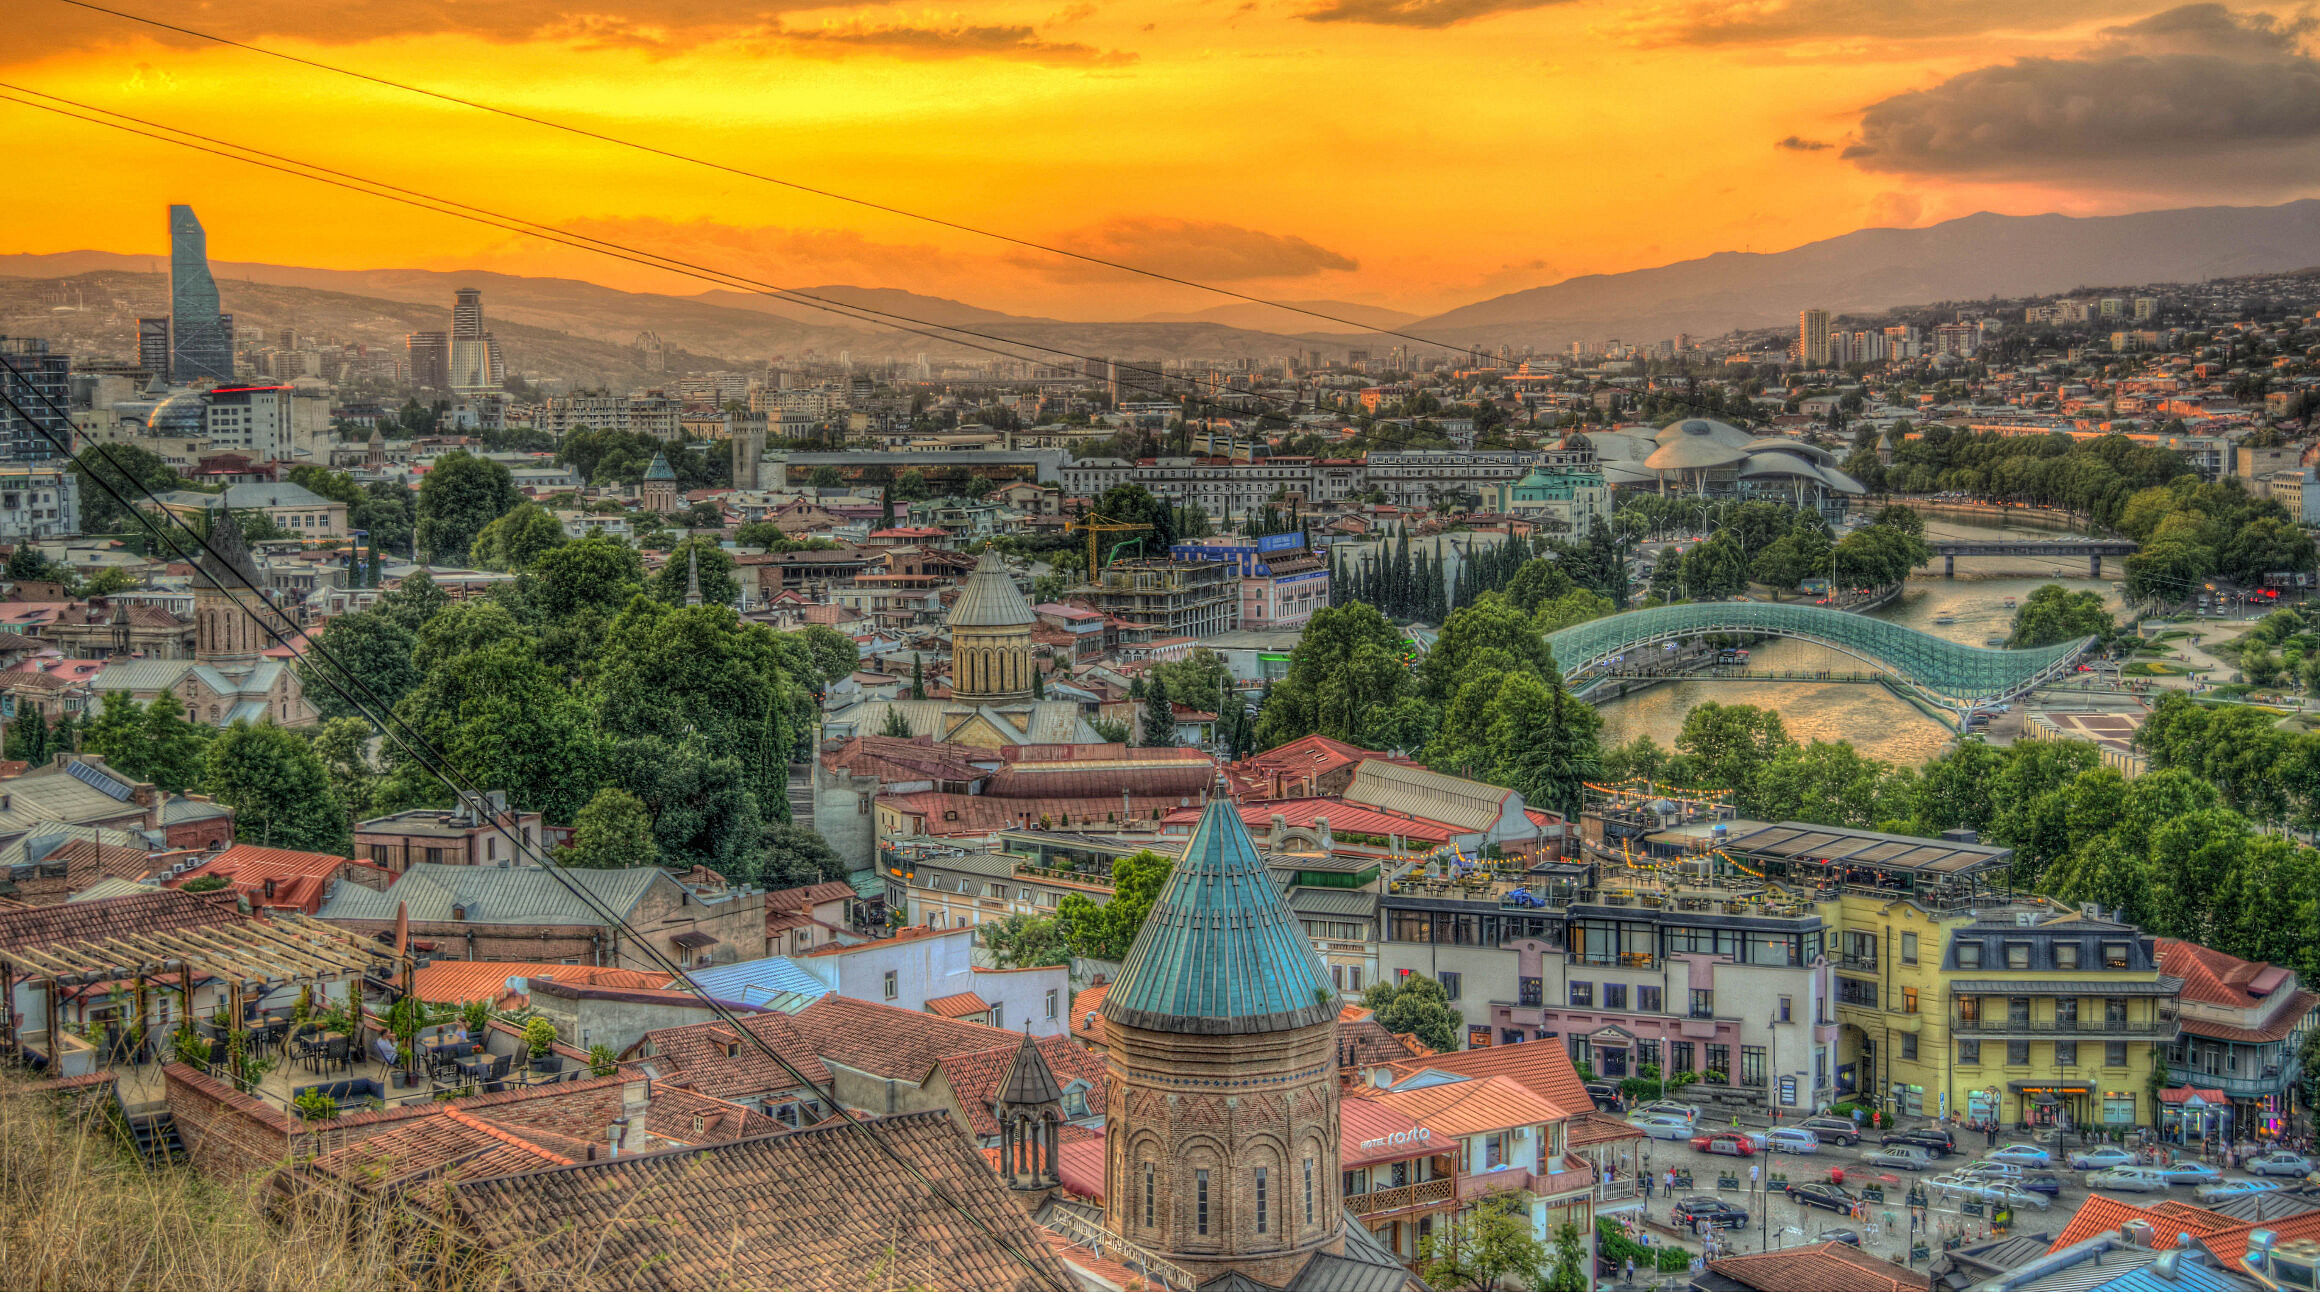 View of Tbilisi at sunset